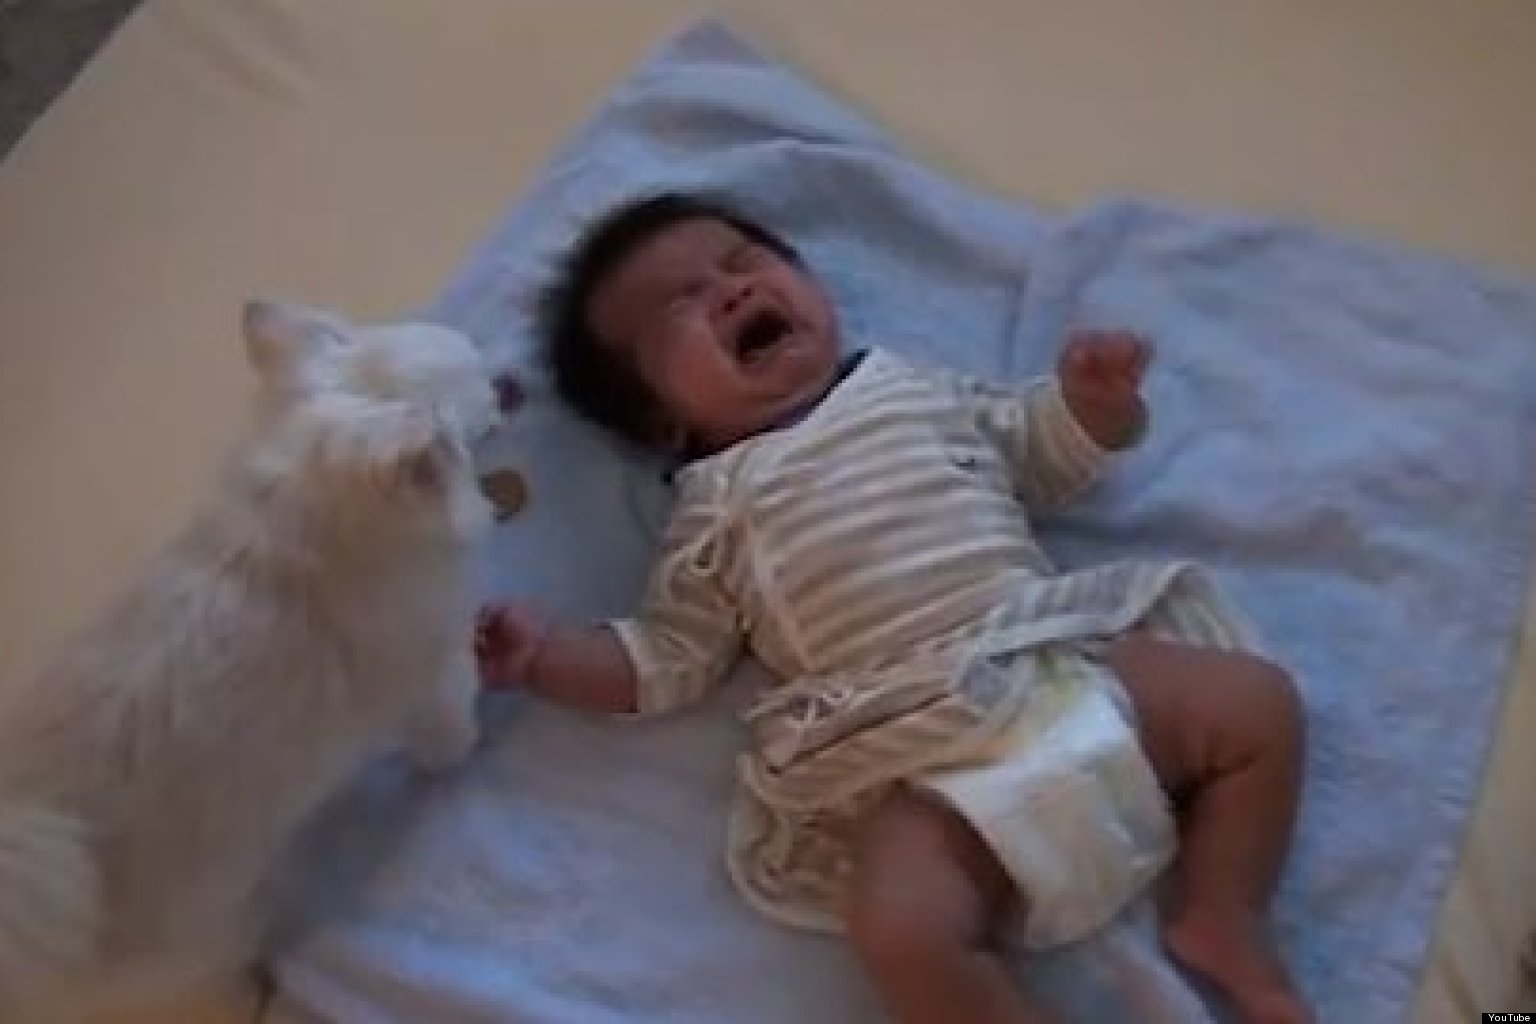 Dog Comforts Crying Baby With A Cookie (VIDEO)1536 x 1024